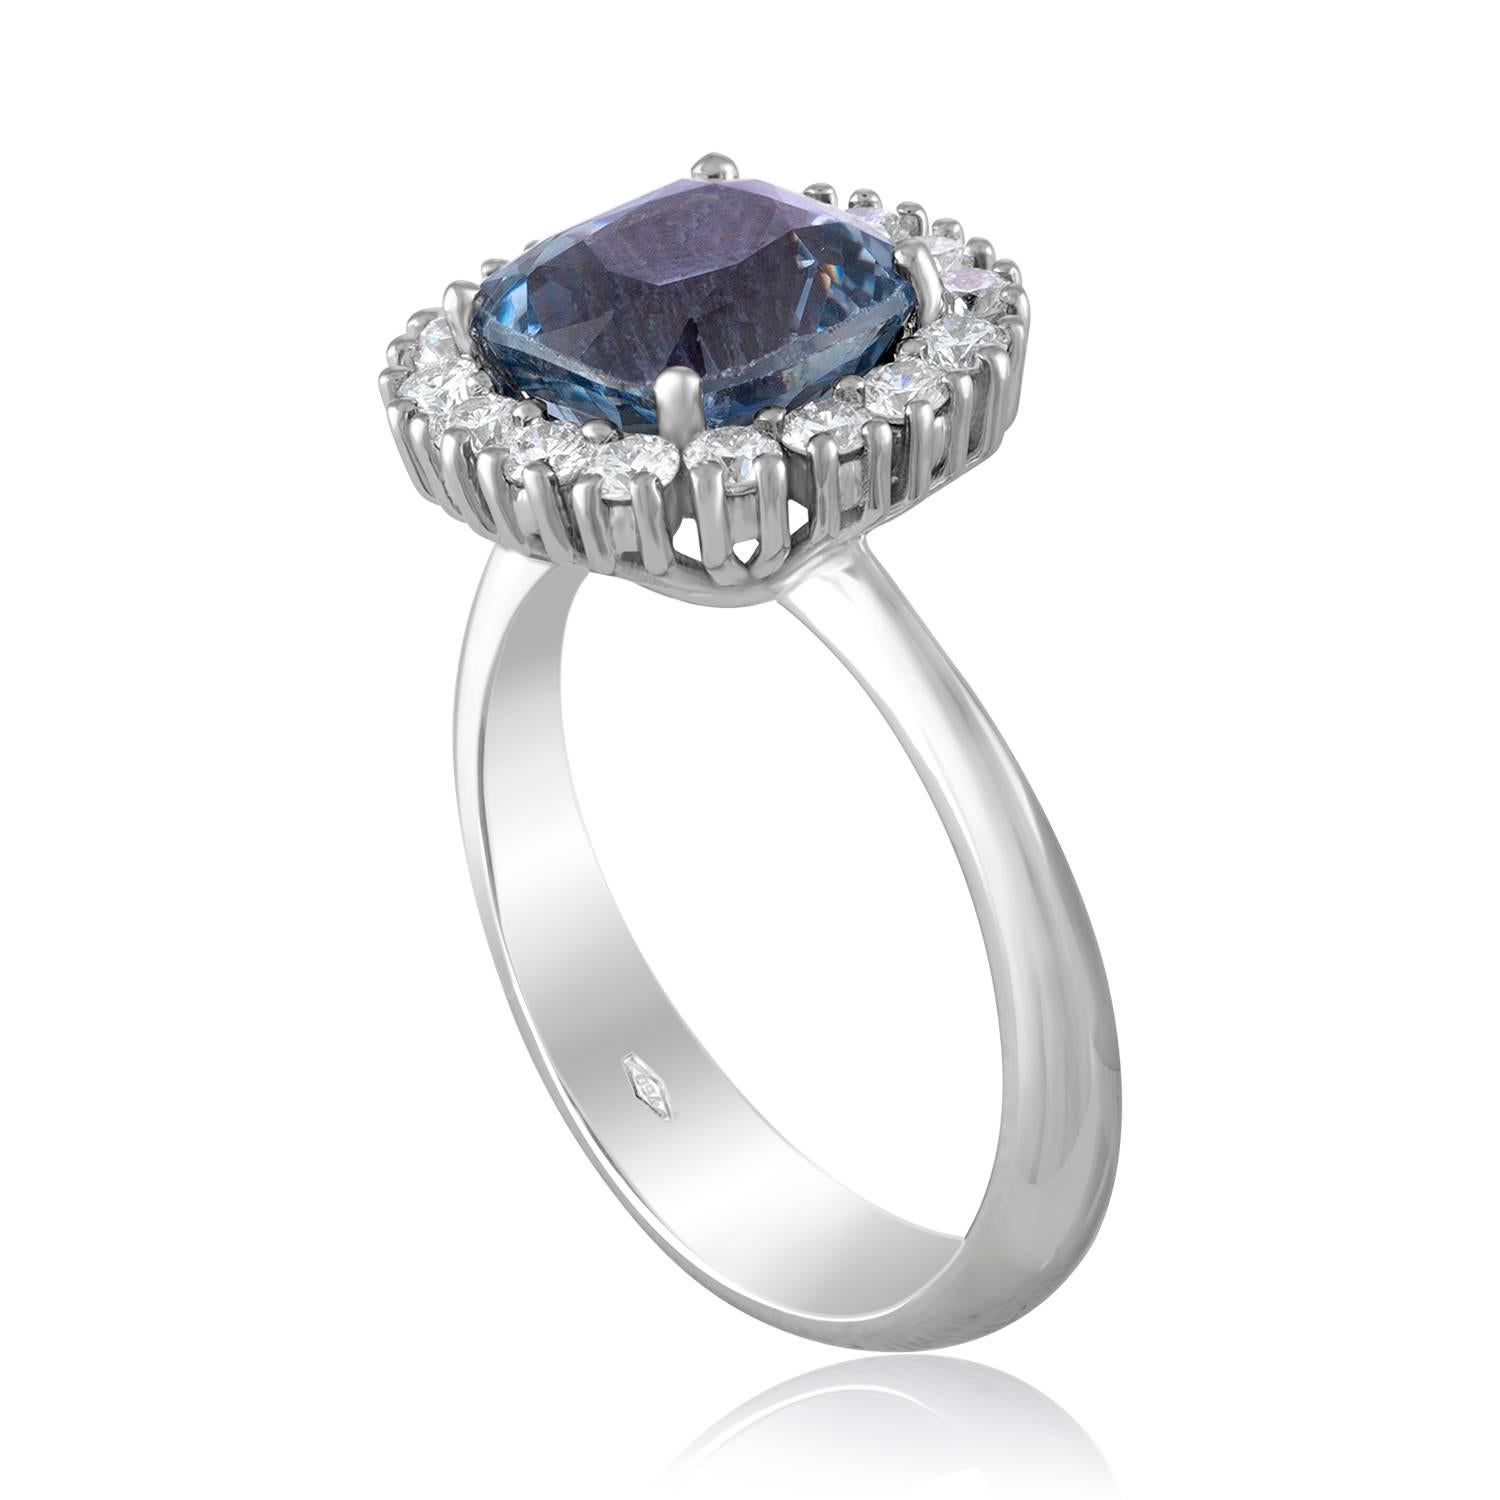 Beautiful Cushion Halo Ring.
The ring is 18K White Gold.
The center stone is a cushion 3.97 Carat Grayish Blue-Violet Sapphire.
The Sapphire is NO HEAT and is certified by AGL. 
The ring has 0.54 Carats F/G VS.
The top of the ring measures 0.50